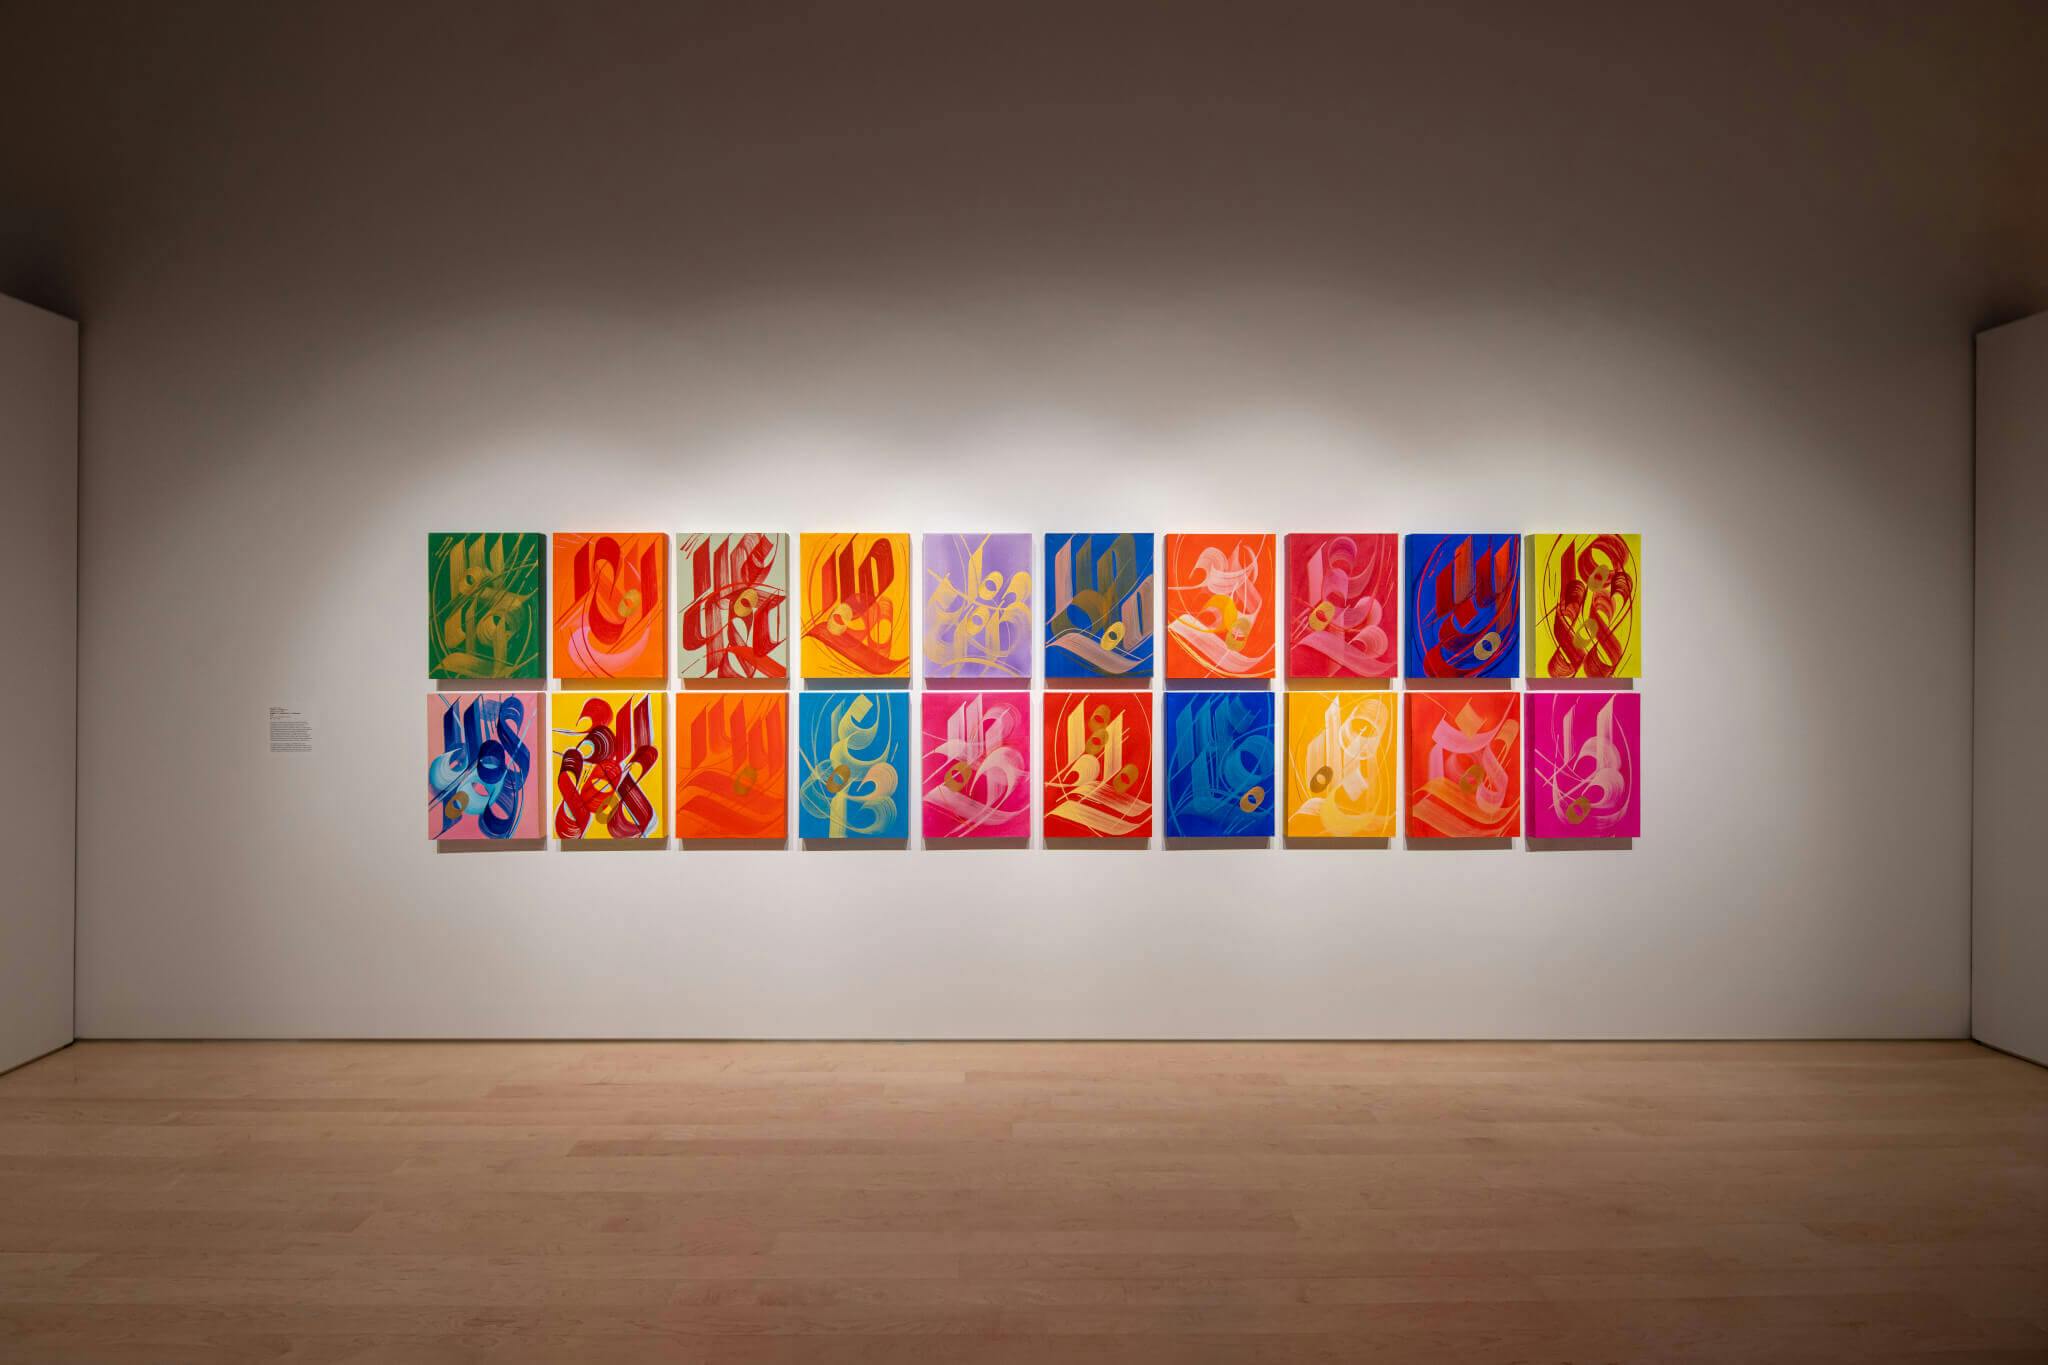 Two rows of 10 brightly colored works are displayed on a white wall with minimal lighting.